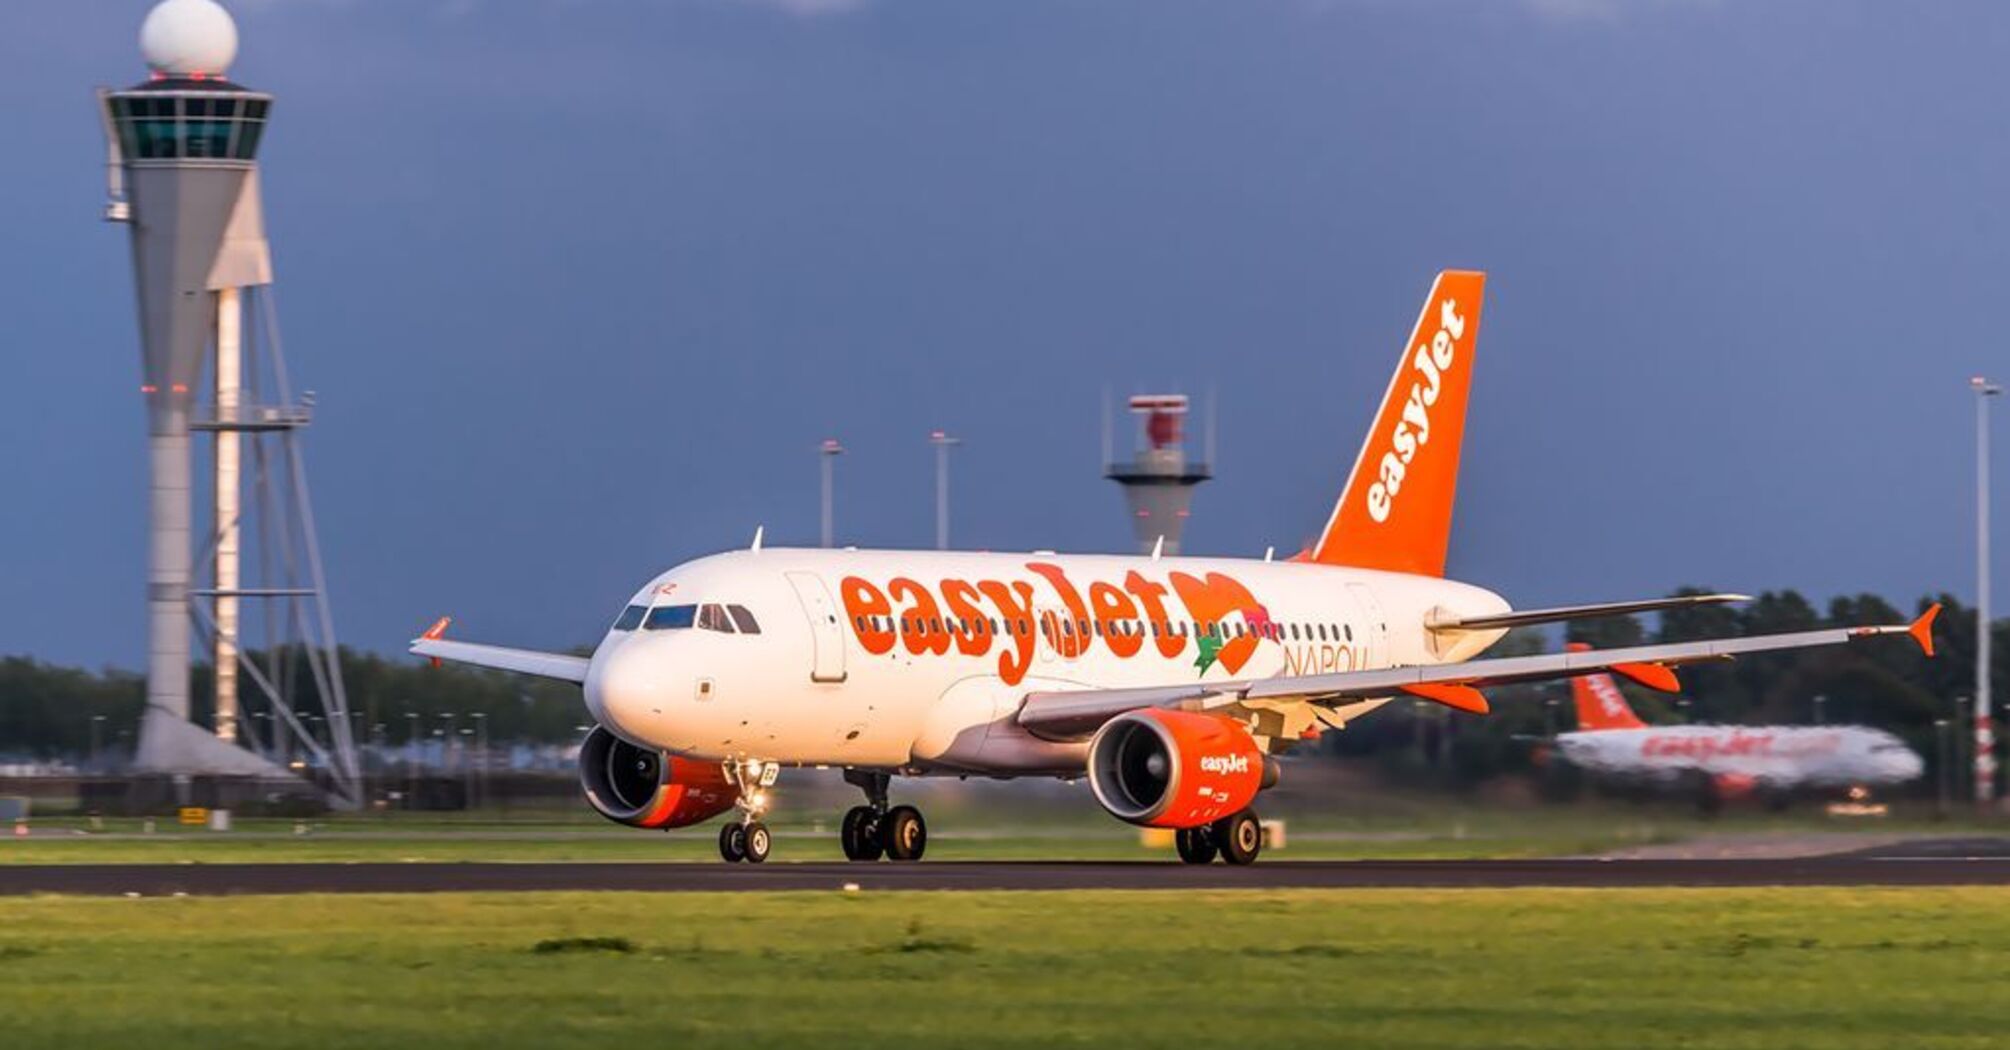 Do not forget to check the size of your hand luggage: EasyJet can fine passengers for violations